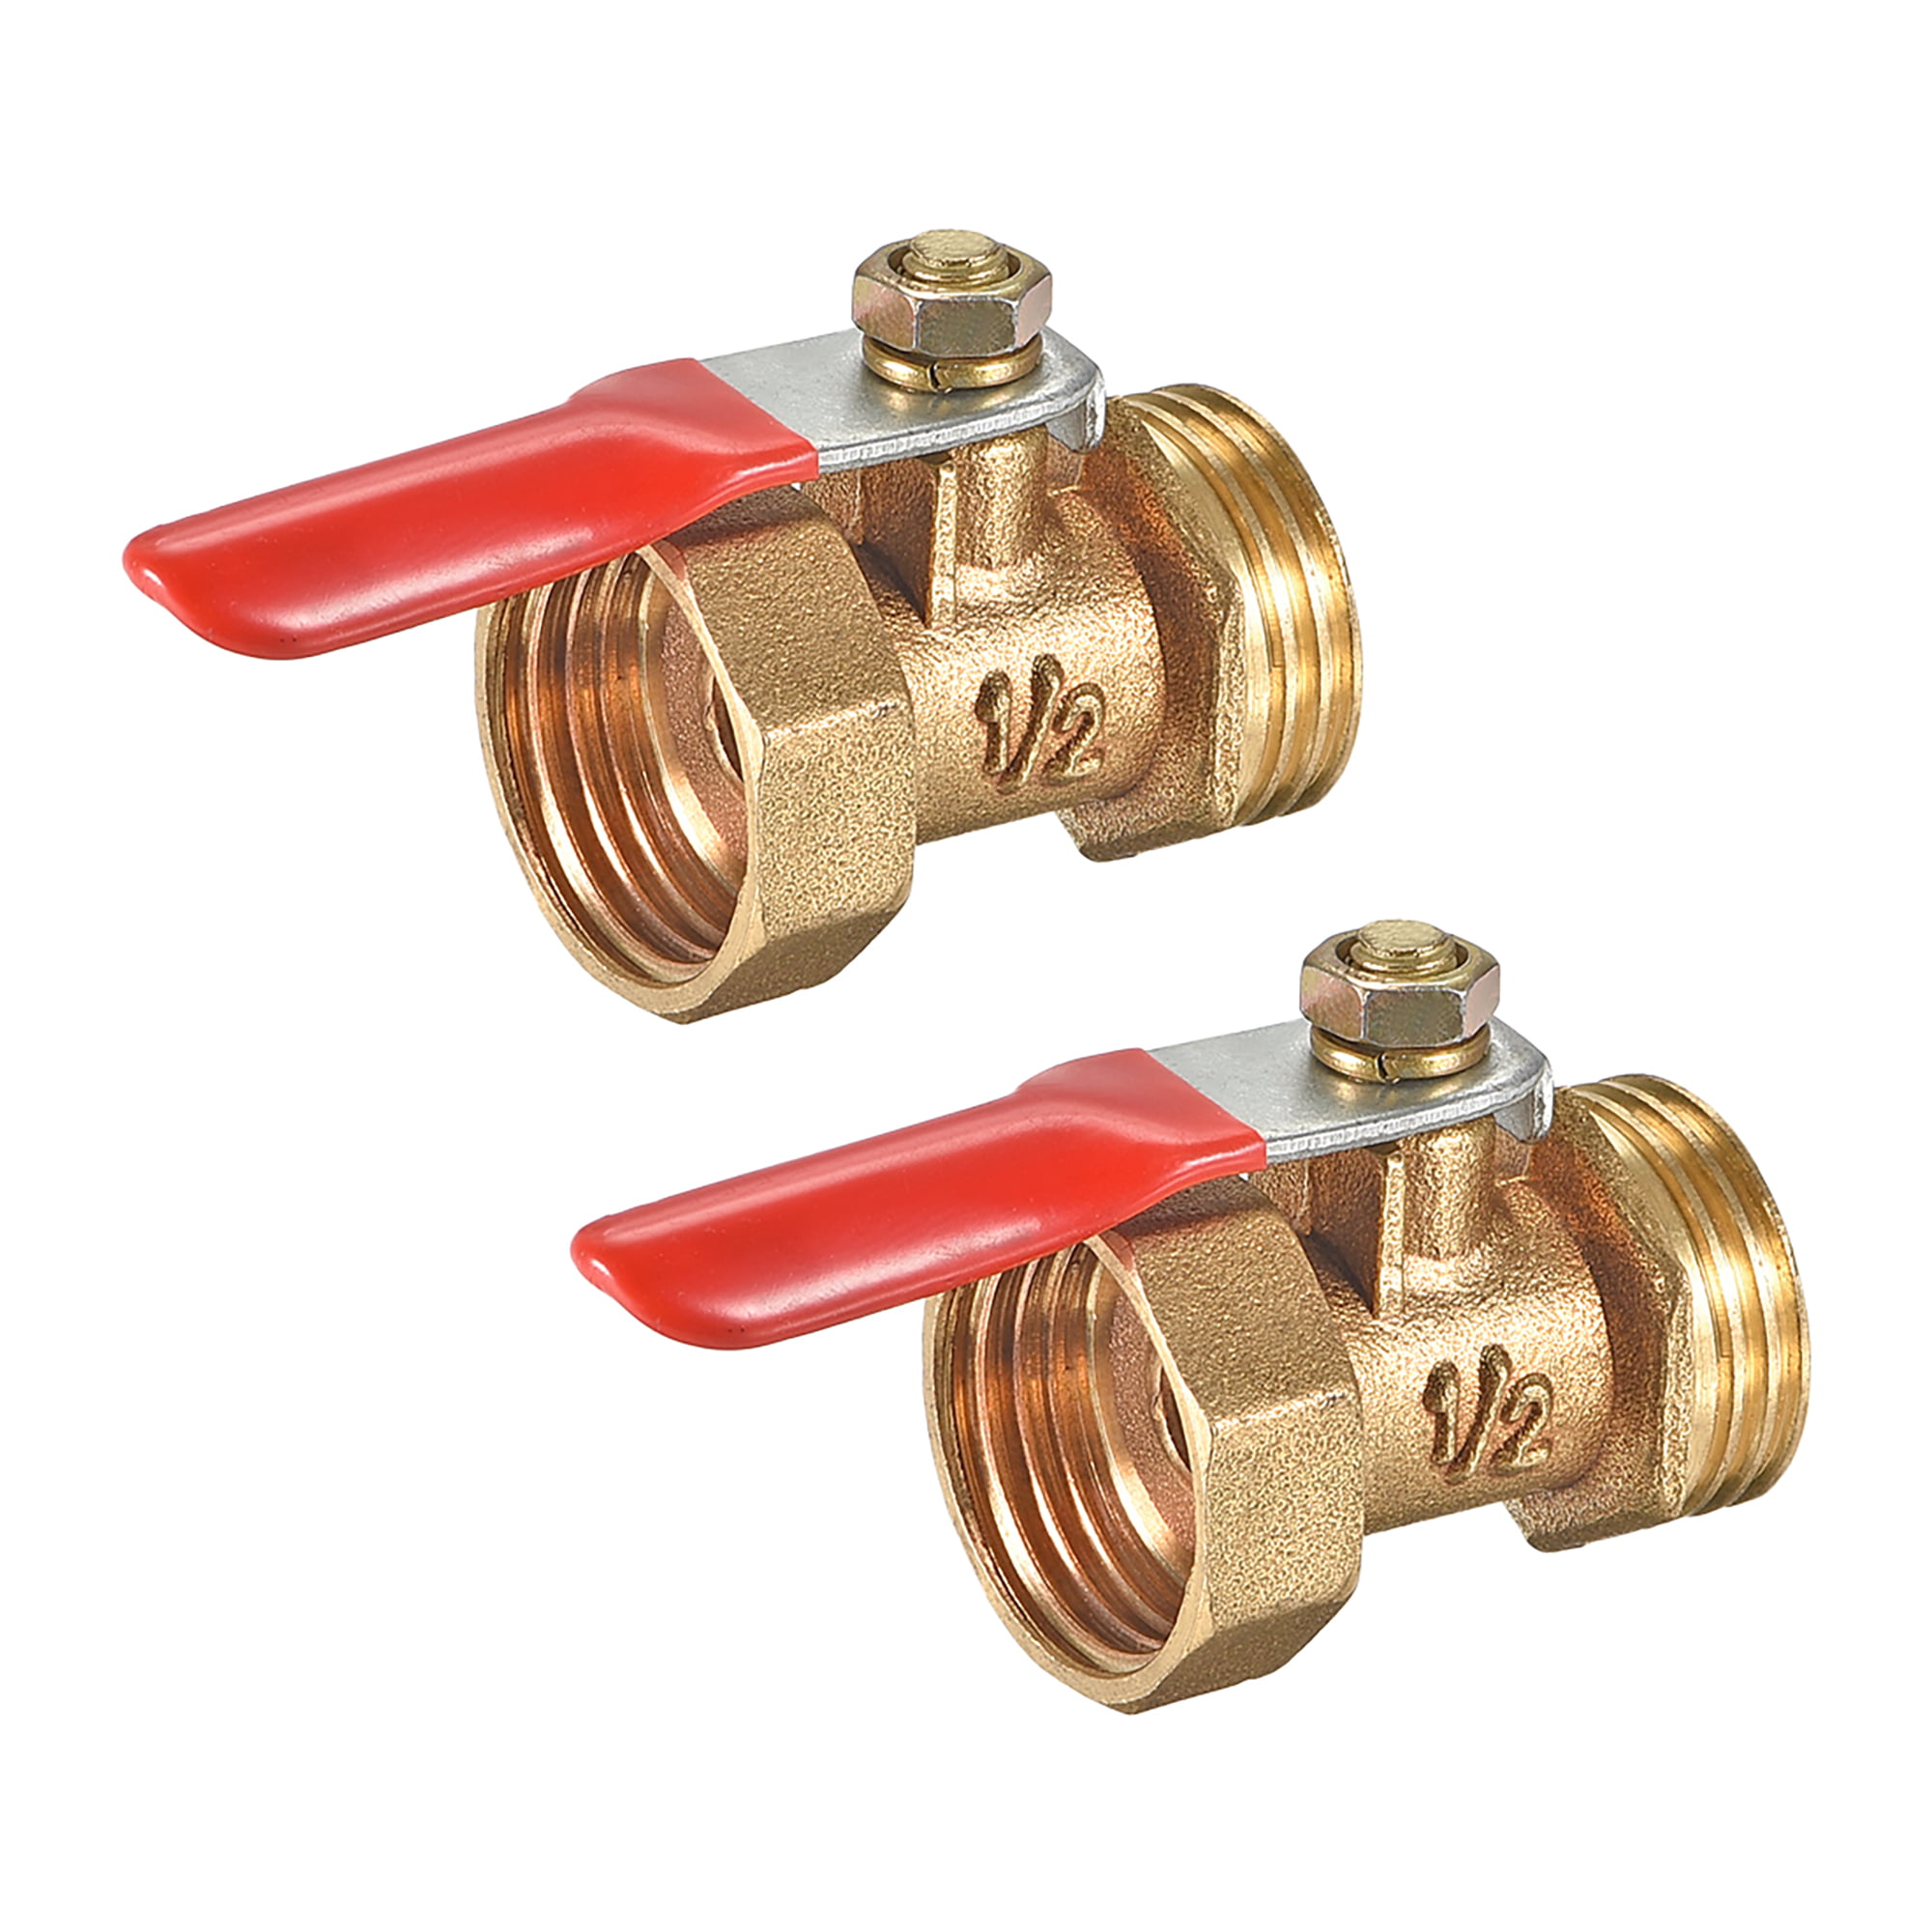 for Valve Switch air Pump Outlet Male to Female Thread Ball Valve 5 pcs G1 / 2 Thick Brass Ball Valve air Compressor